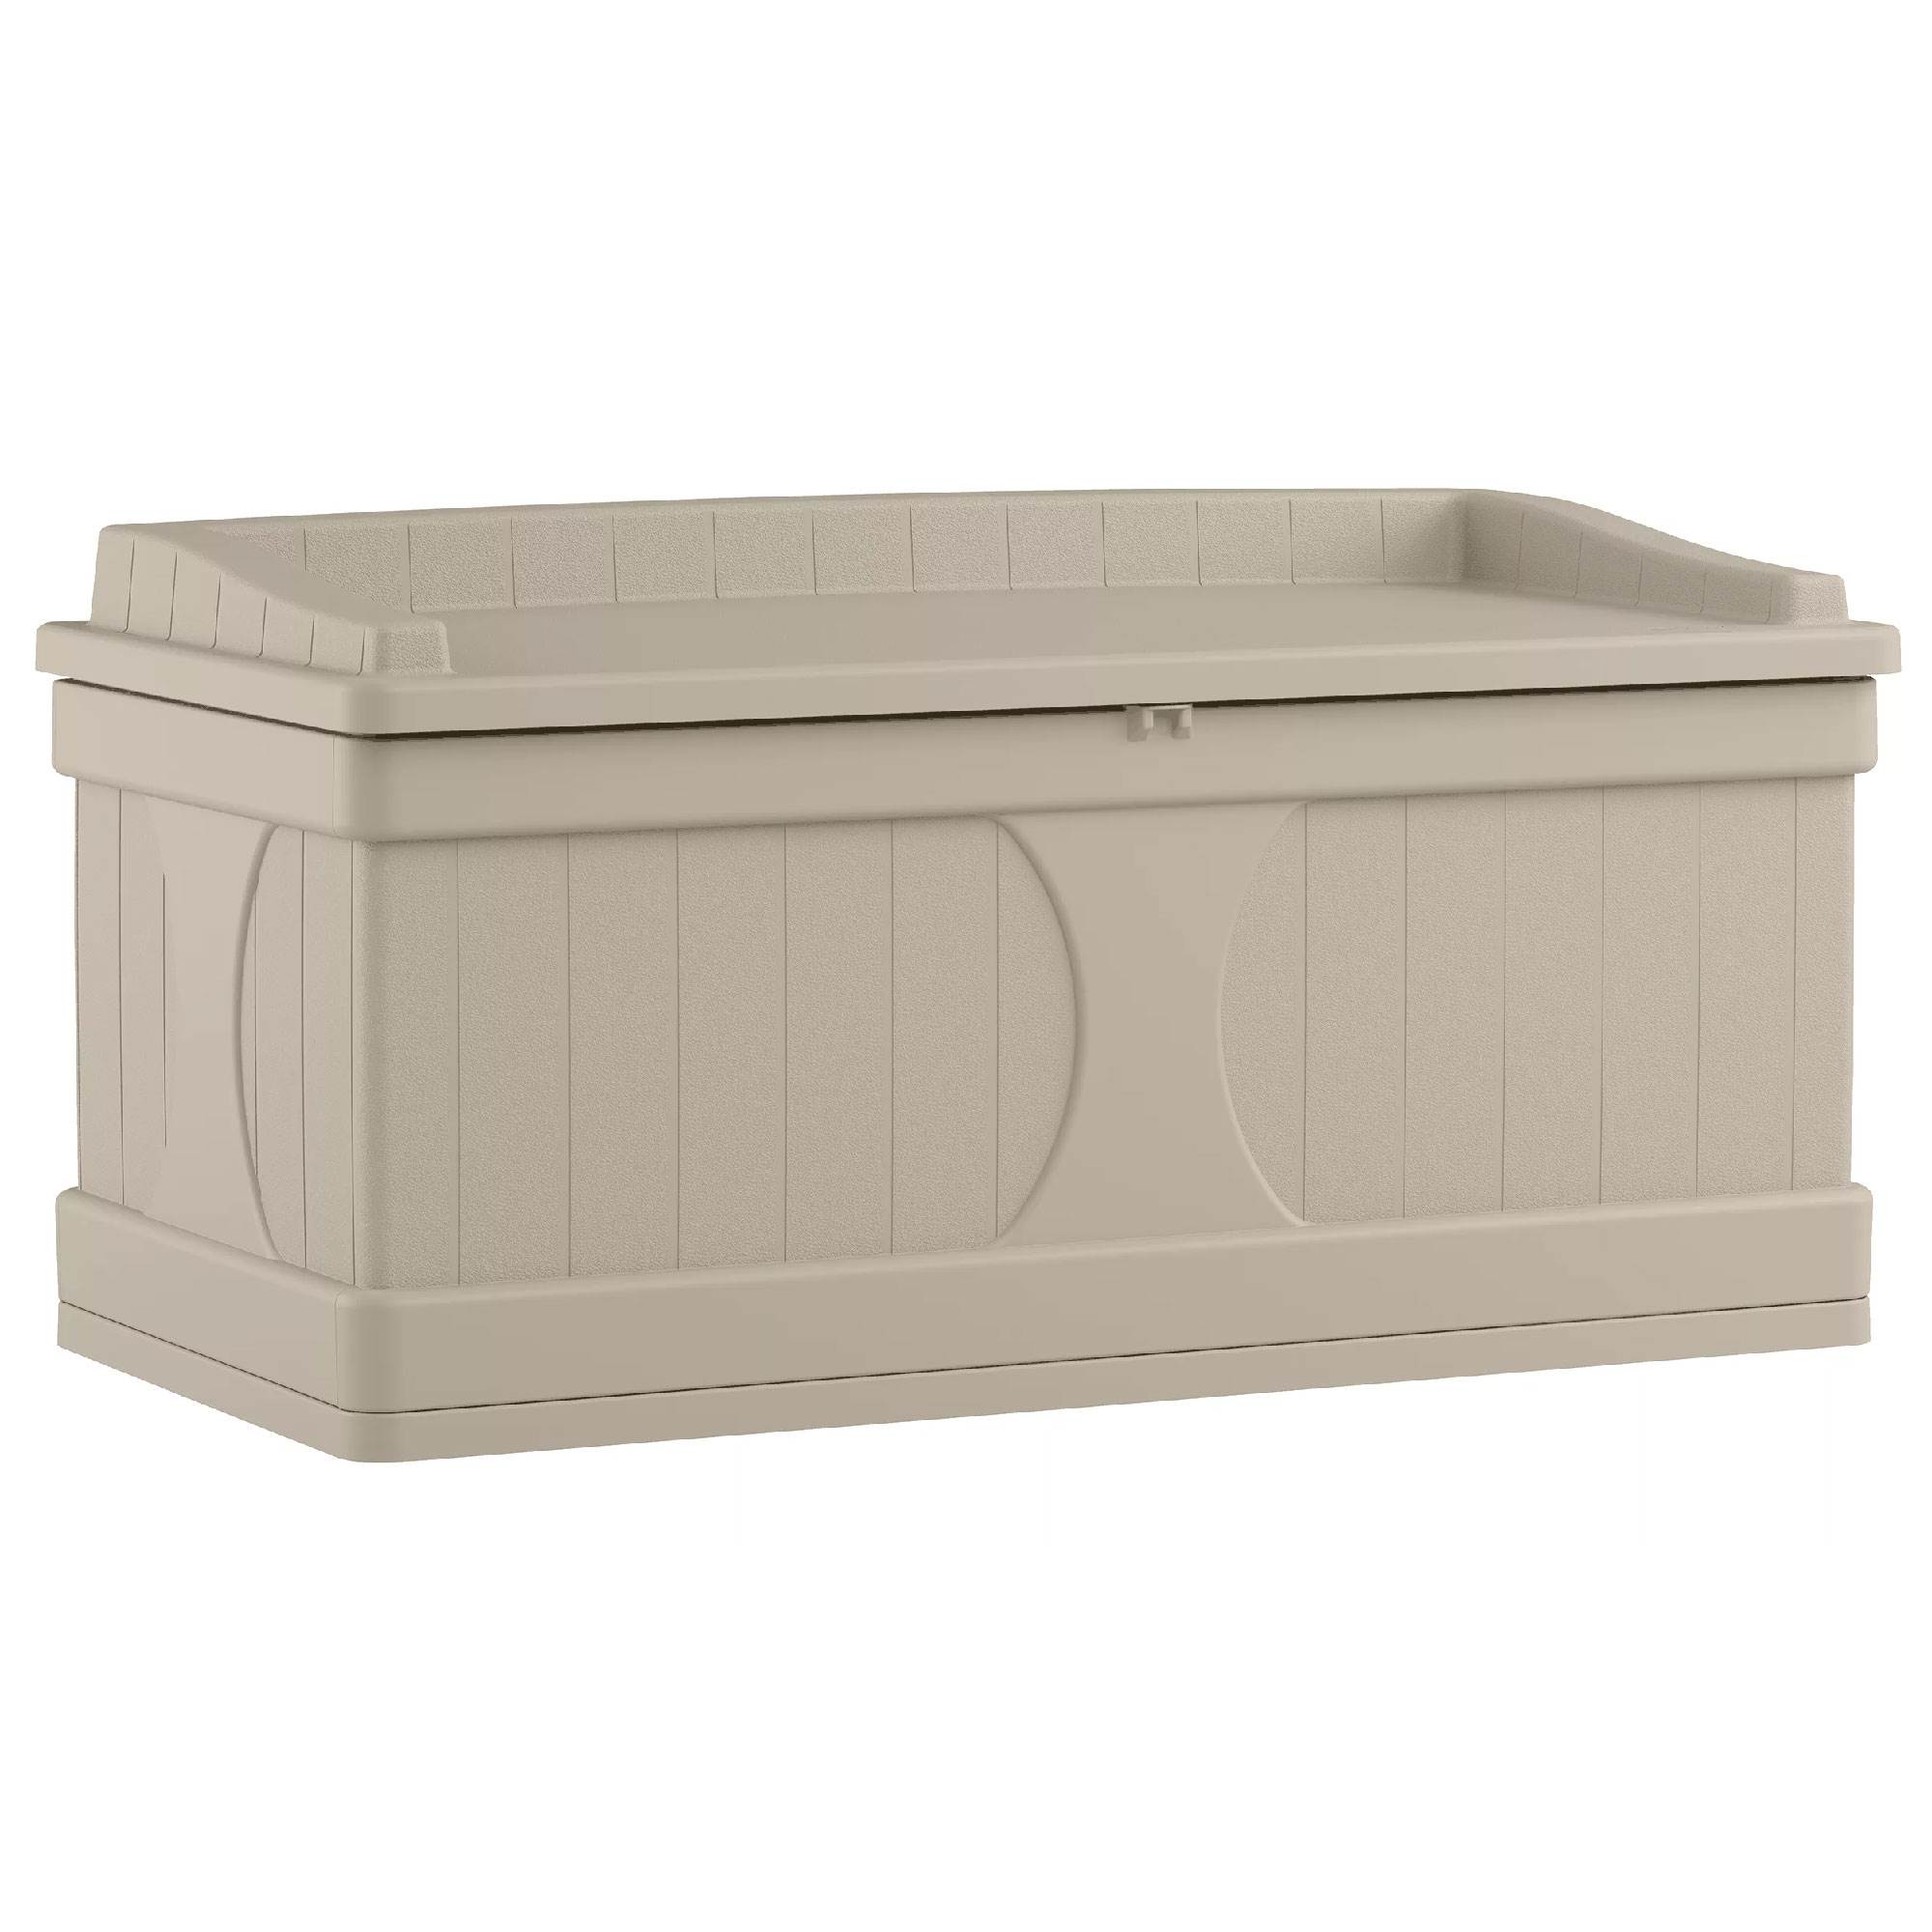 Suncast DB9500 99 Gallon Resin Outdoor Patio Storage Deck Box with Seat, Taupe - image 1 of 4